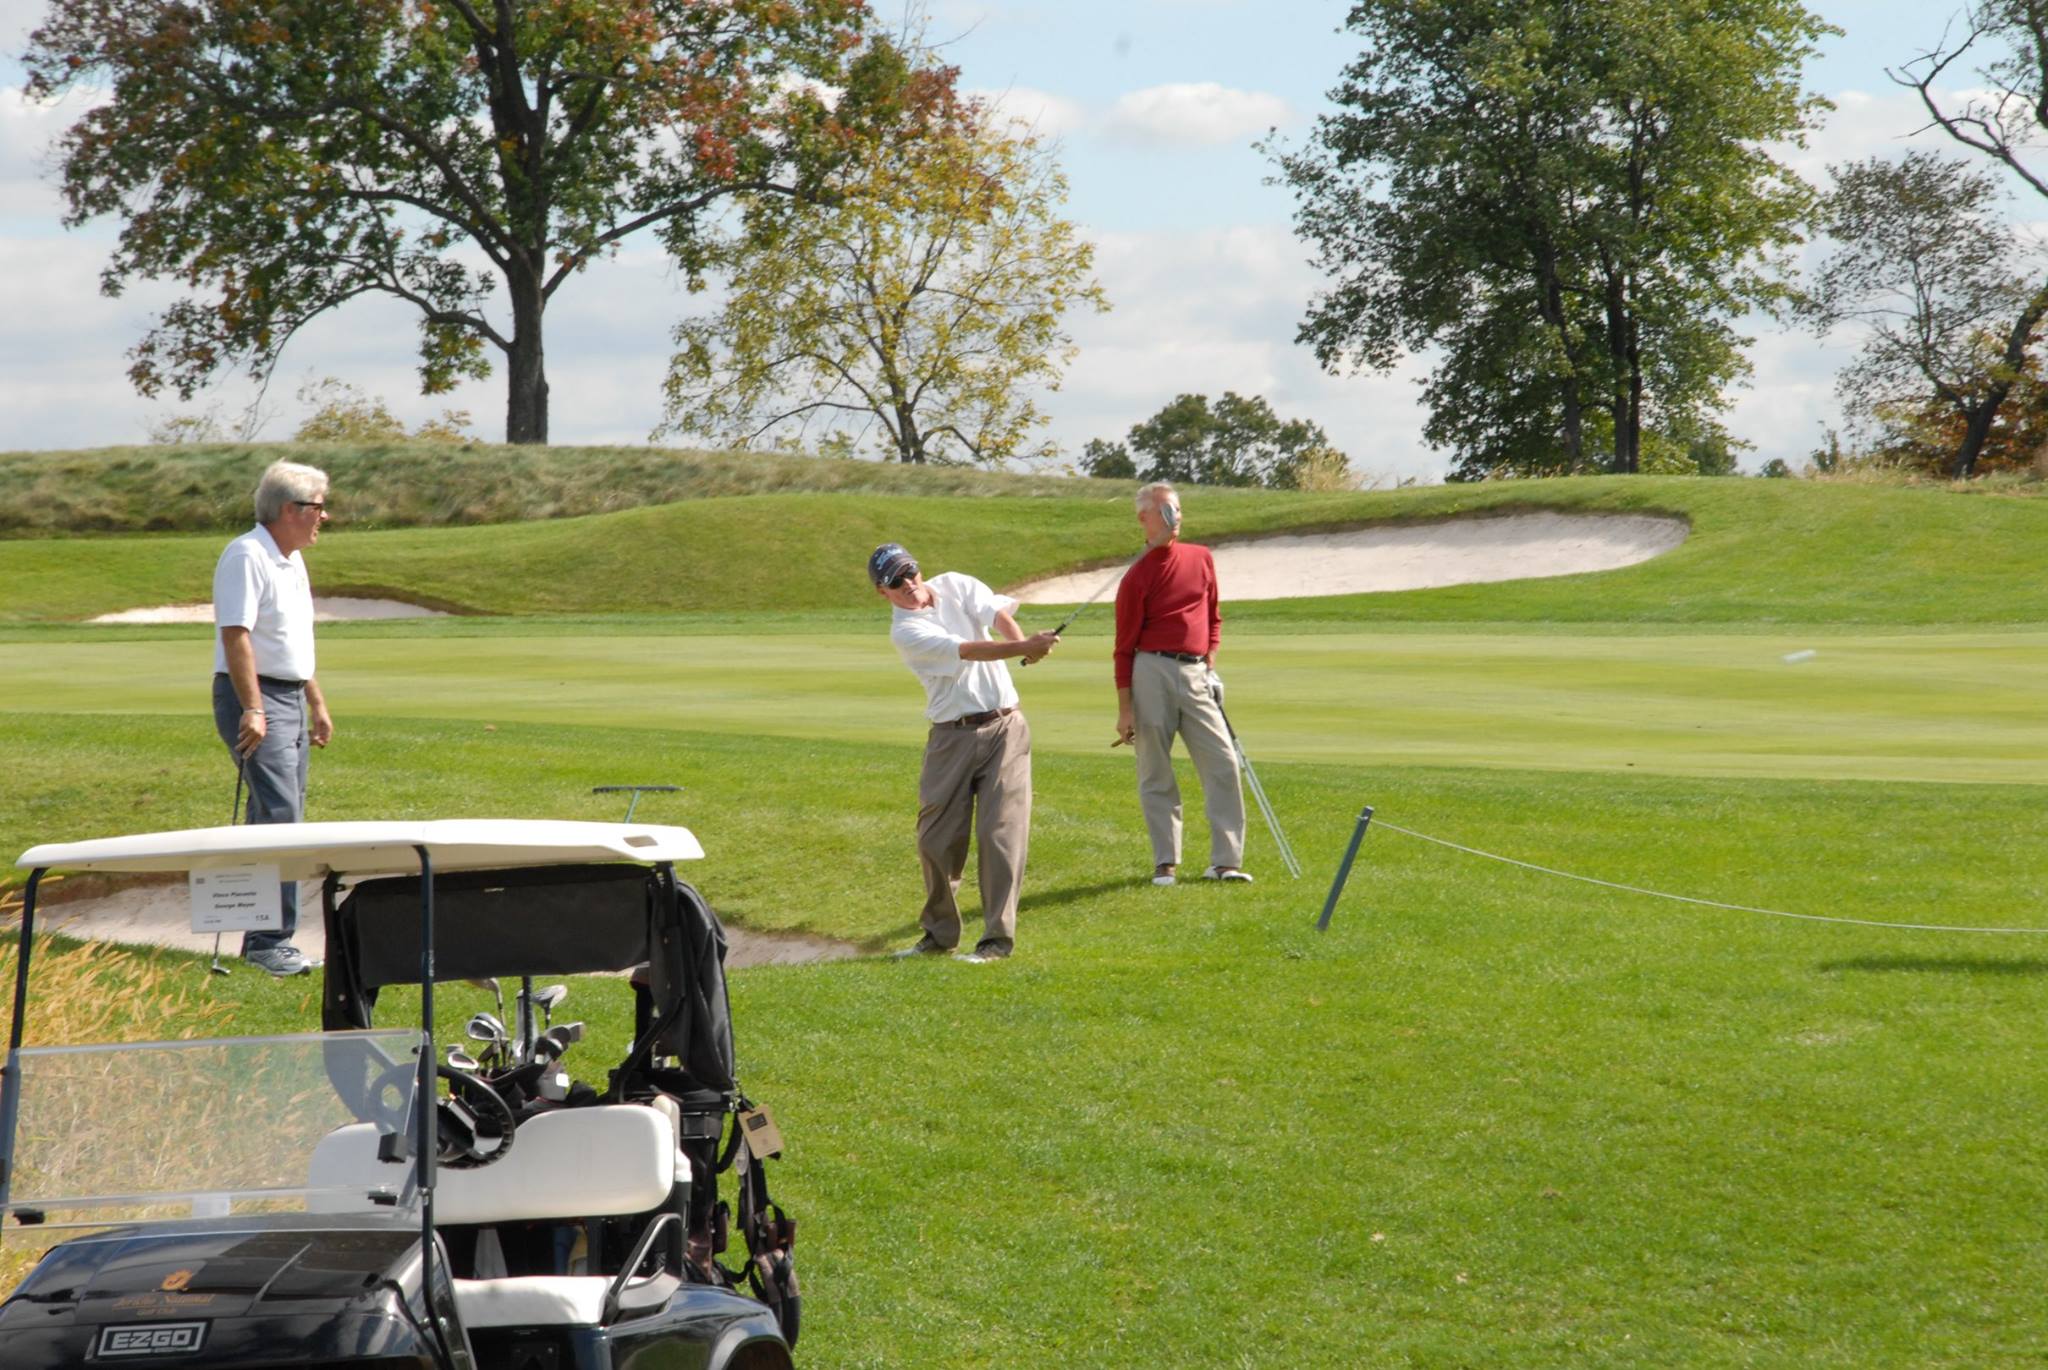 On October 5, 2015, Community Options, a national nonprofit dedicated to providing housing and employment support to people with intellectual and developmental disabilities, hosted its annual iMatter Golf Classic at Jericho National Golf Club in New Hope, PA